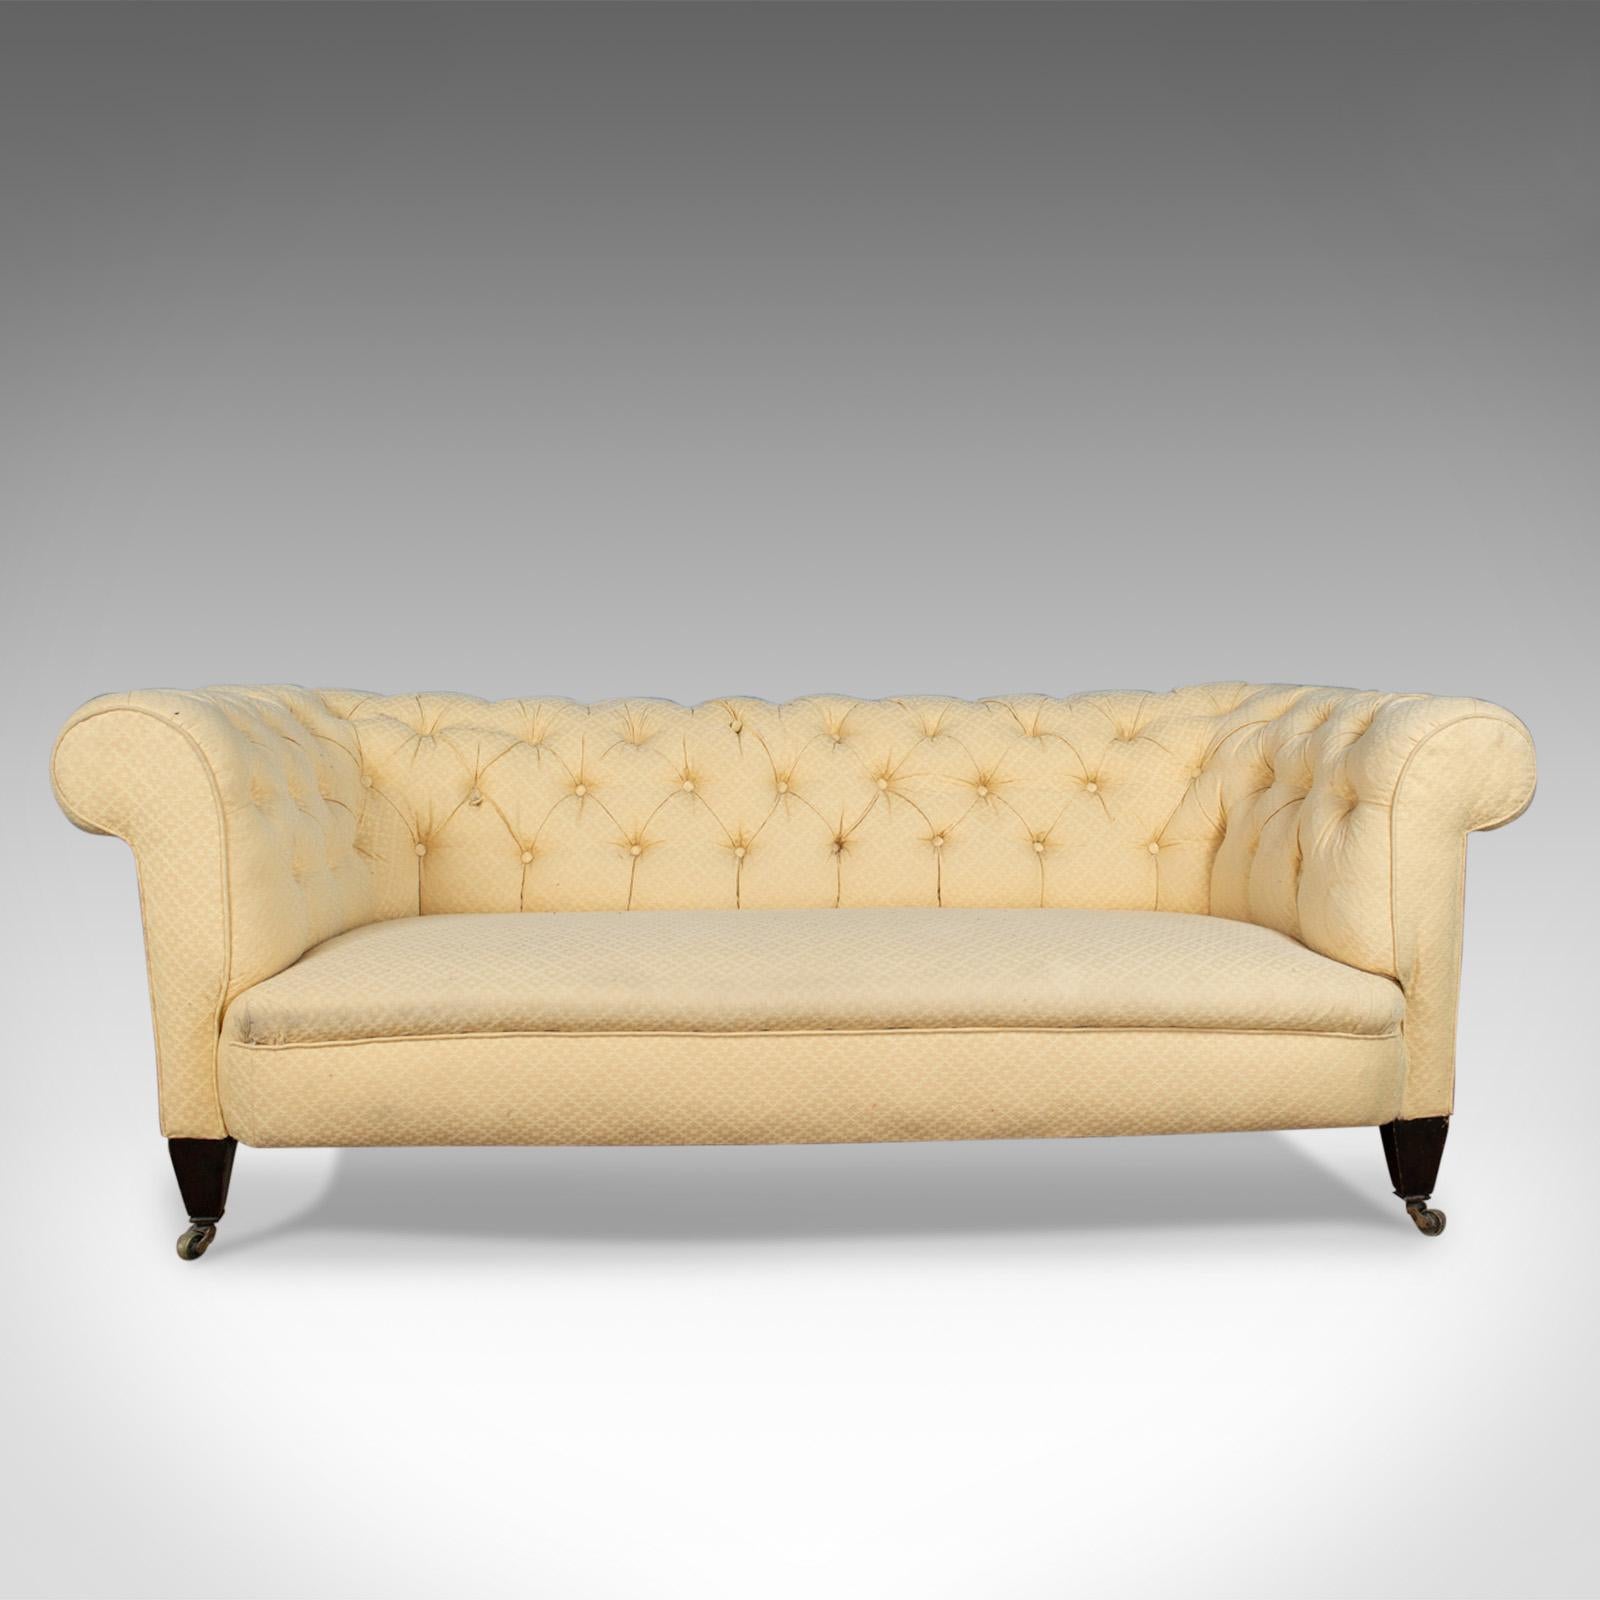 This is an antique Chesterfield sofa. An English, Victorian, three-seat settee dating to the late 19th century, circa 1890.

Attractive button back design with mahogany frame
Classic Chesterfield styling
Raised on stout, tapering legs to the